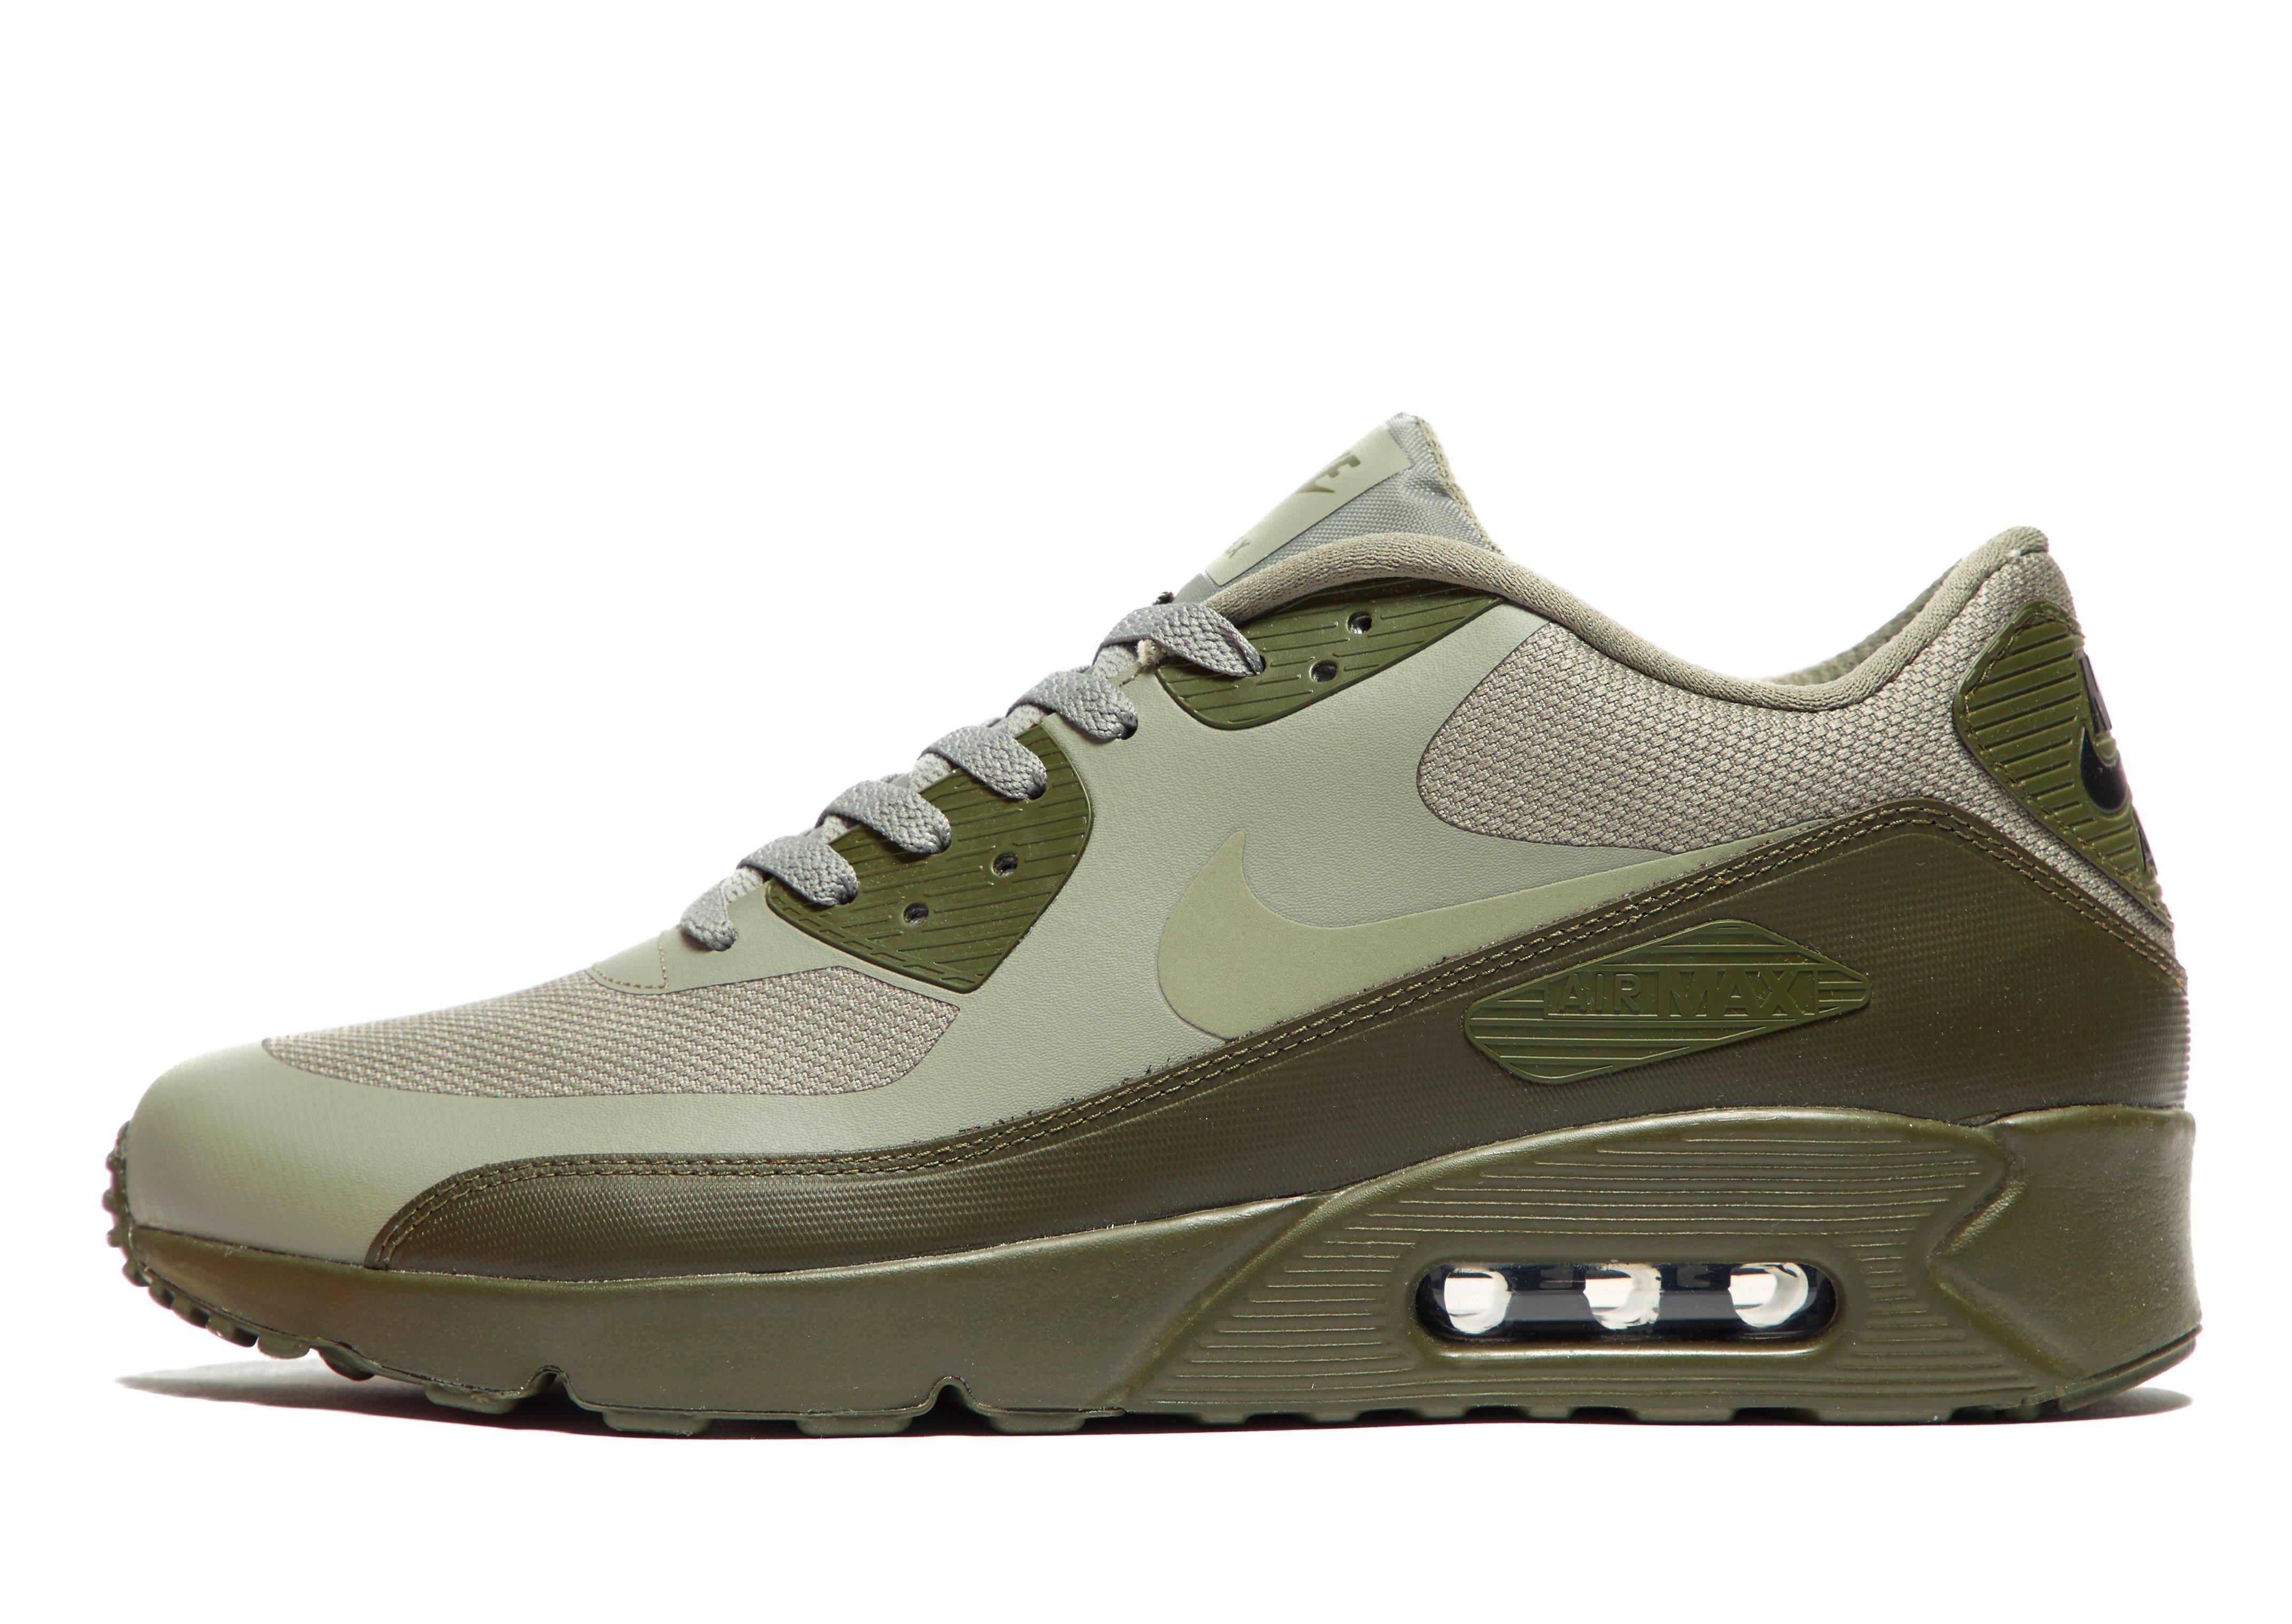 Nike Leather Air Max 90 Ultra Essential 2.0 in Green for Men - Lyst